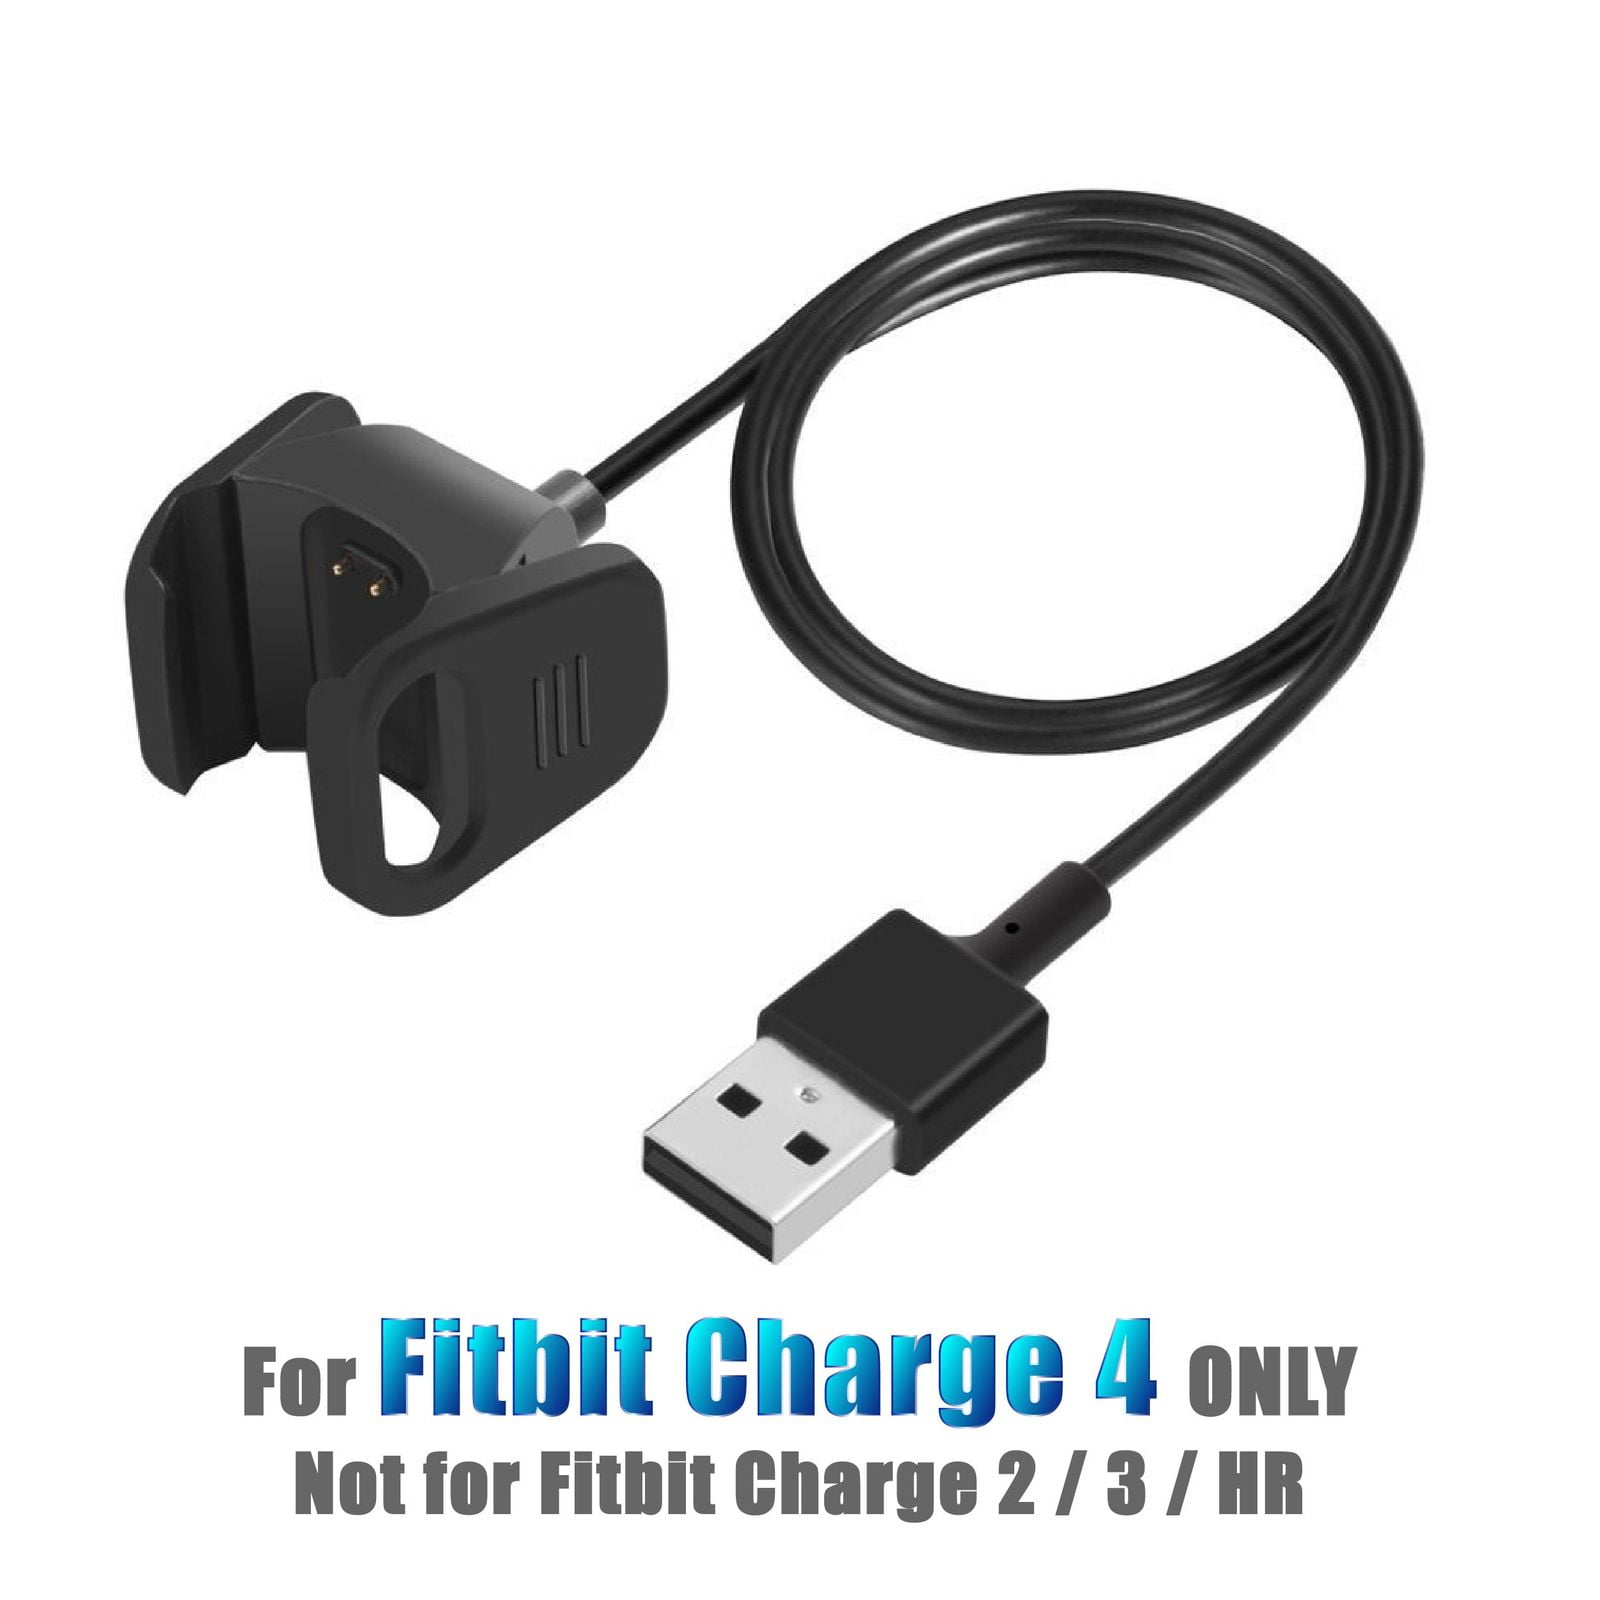 For Fitbit Charge Charger, Replacement USB Charging Cable Cord Compatible with Fitbit Charge 4 / Charge 4 Special Edition SE Fitness Activity - 1.5ft by Insten - Walmart.com